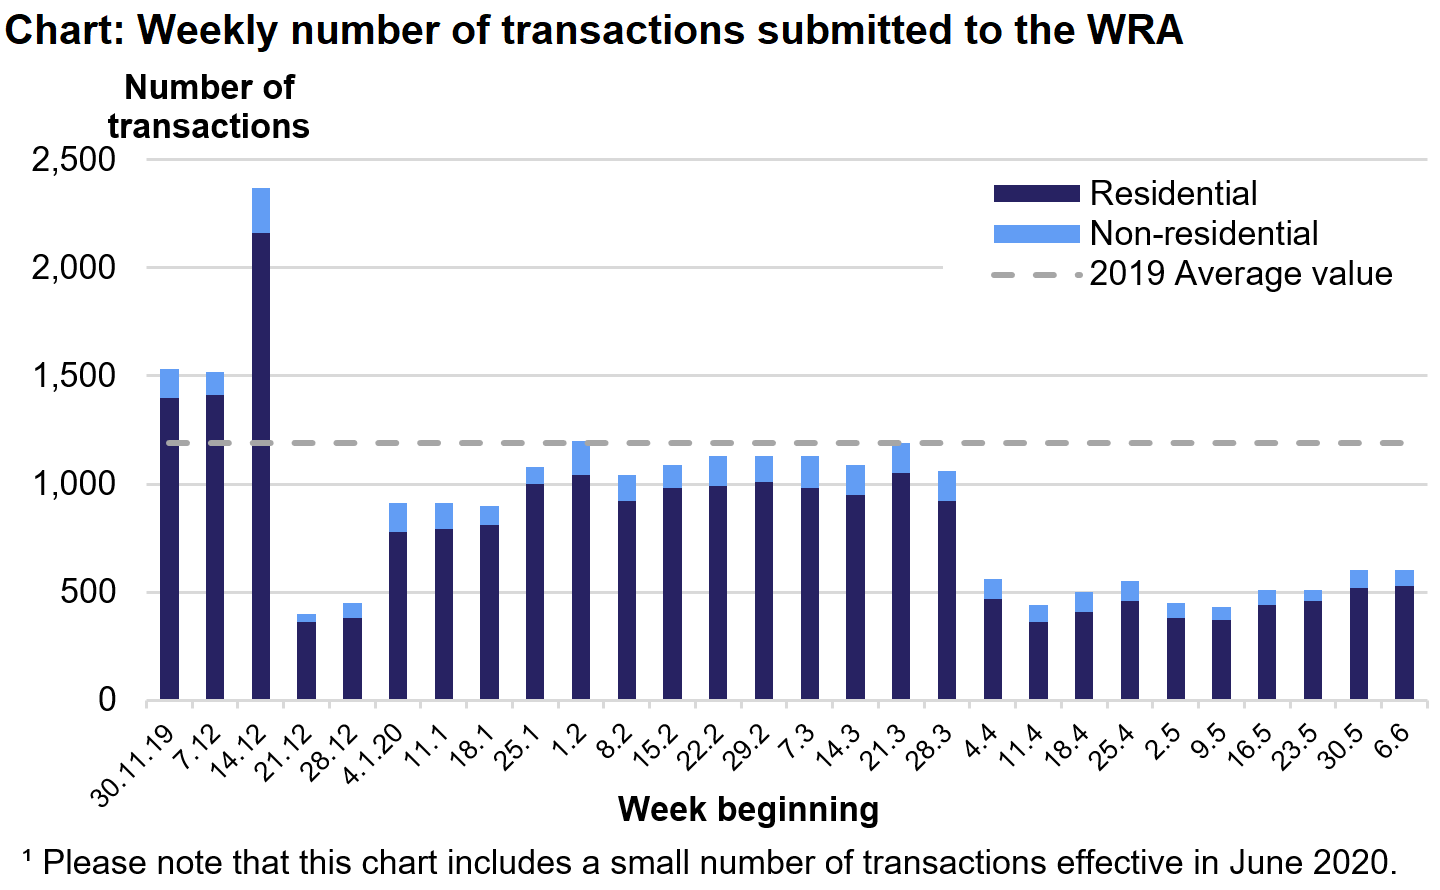 The chart shows the number of residential and non-residential transactions submitted to the WRA each week from December 2019 to June 2020. Please note that this chart includes a small number of transactions effective in June 2020.